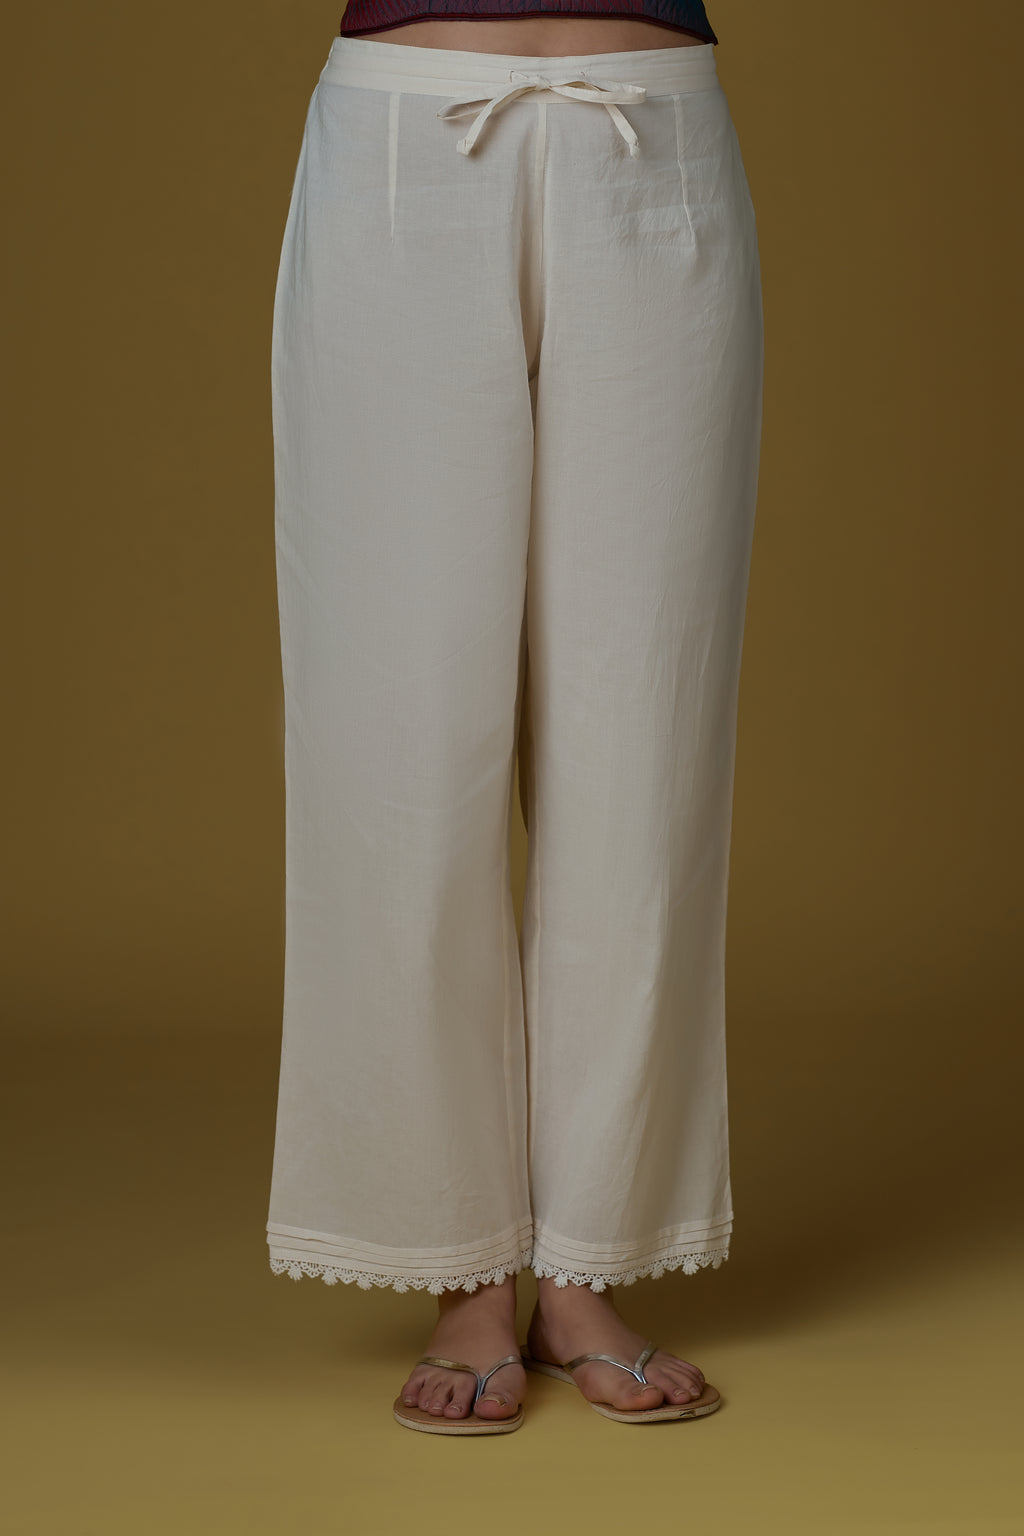 Straight pants finished with pin tucks and lace detailing at hem.